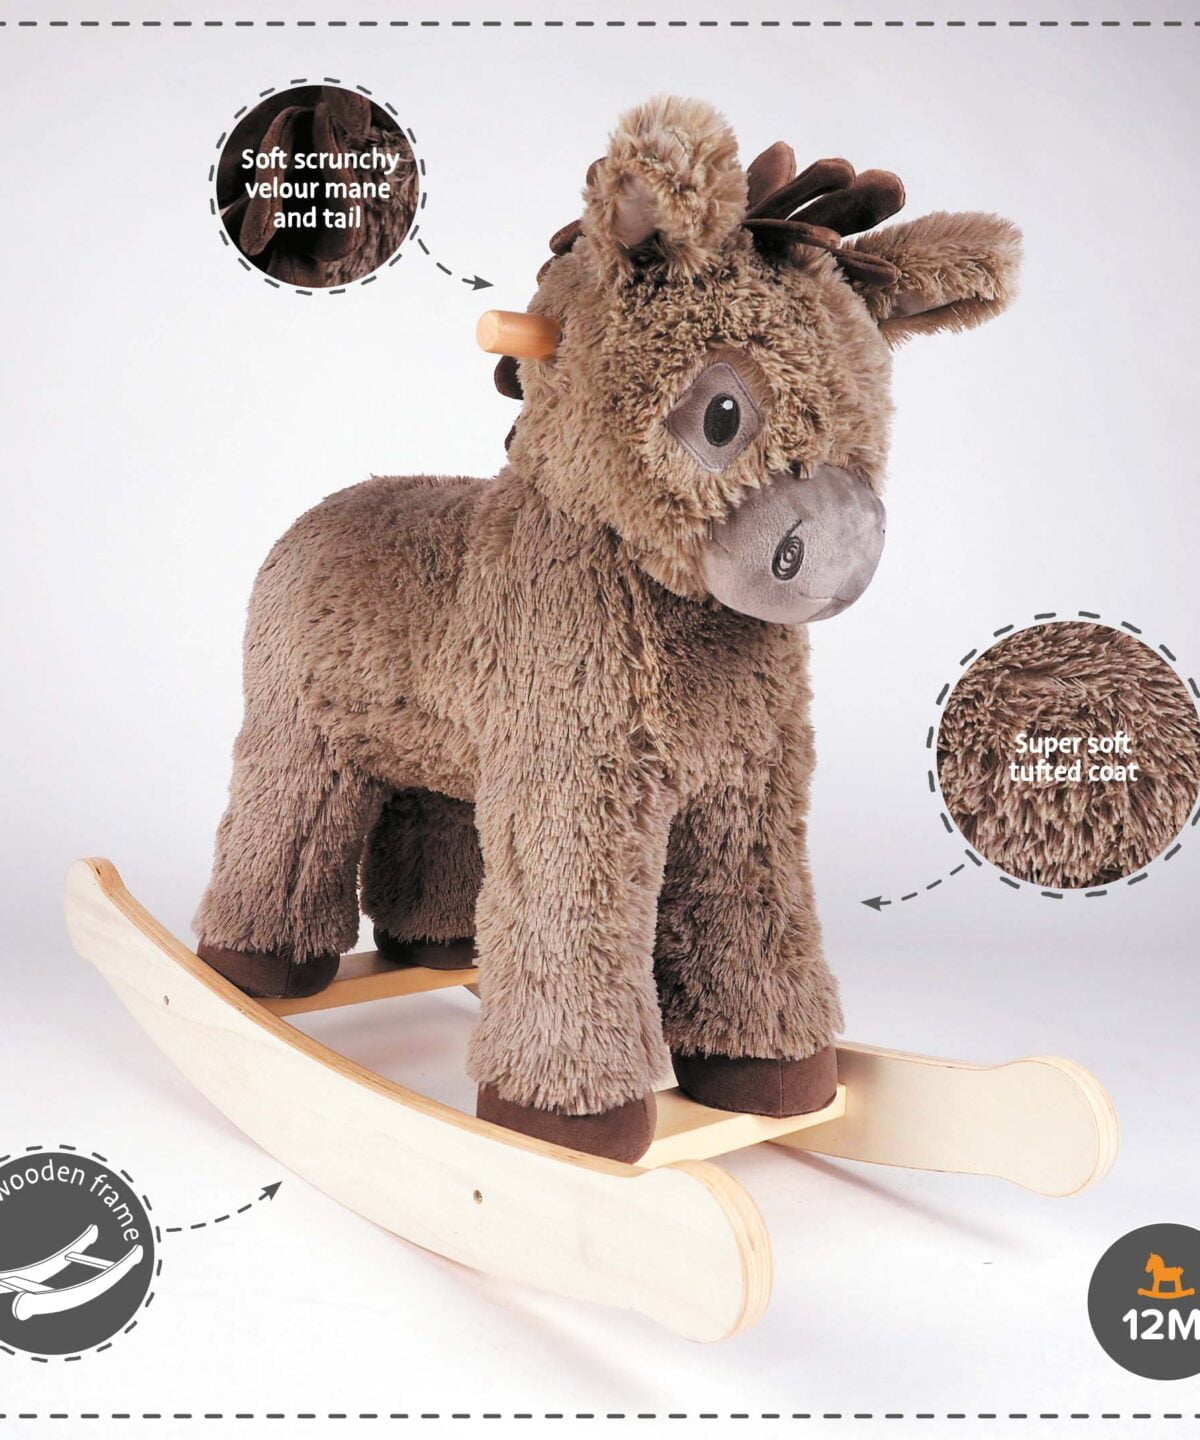 Features and benefits displayed for Norbert Rocking Donkey 12m+